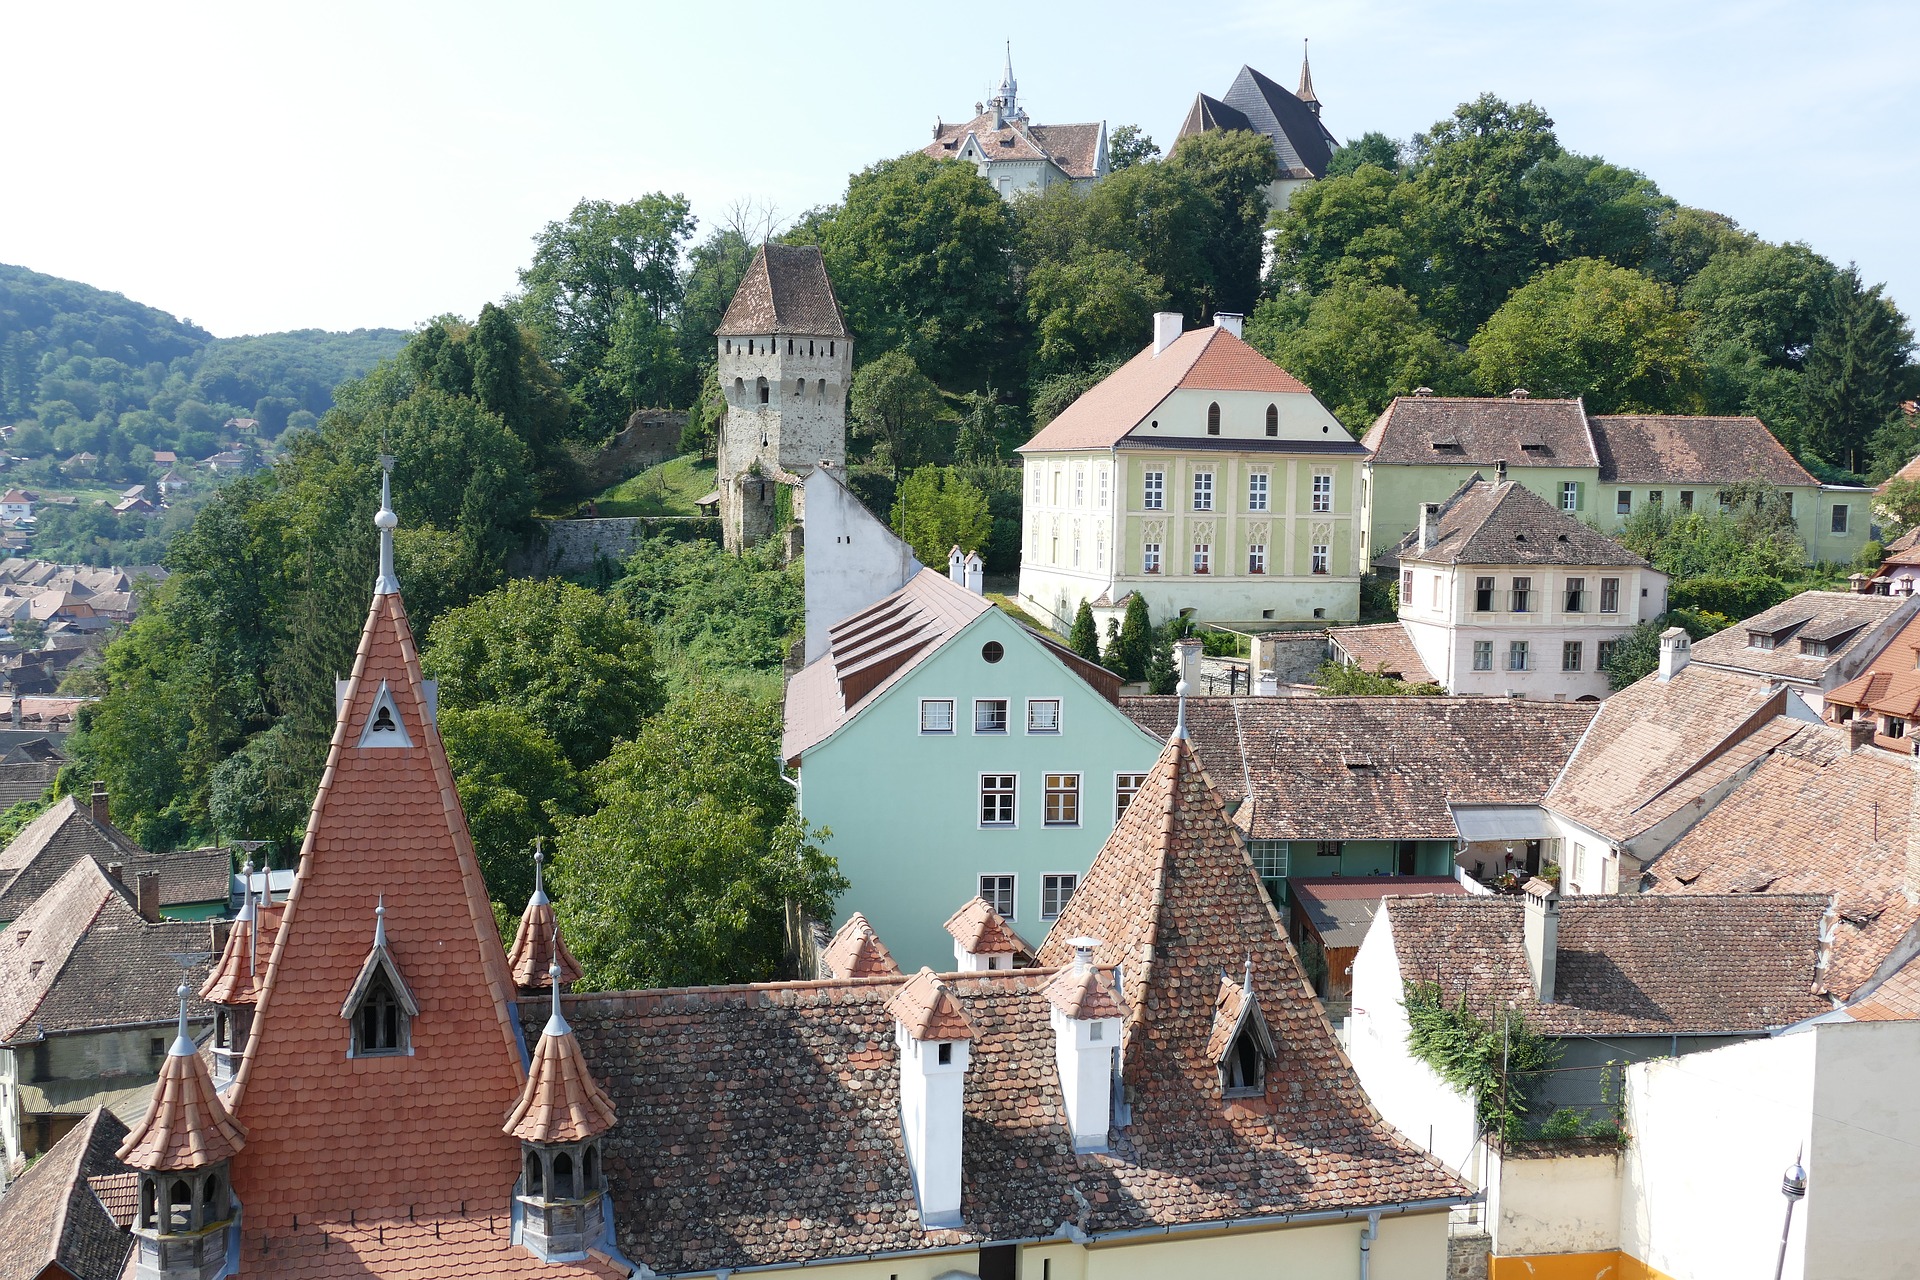 It is located in the Transylvania region and has a spectacular walled old town that is preserved in excellent condition.  The town is full of legends and is wrapped in a very special aura.